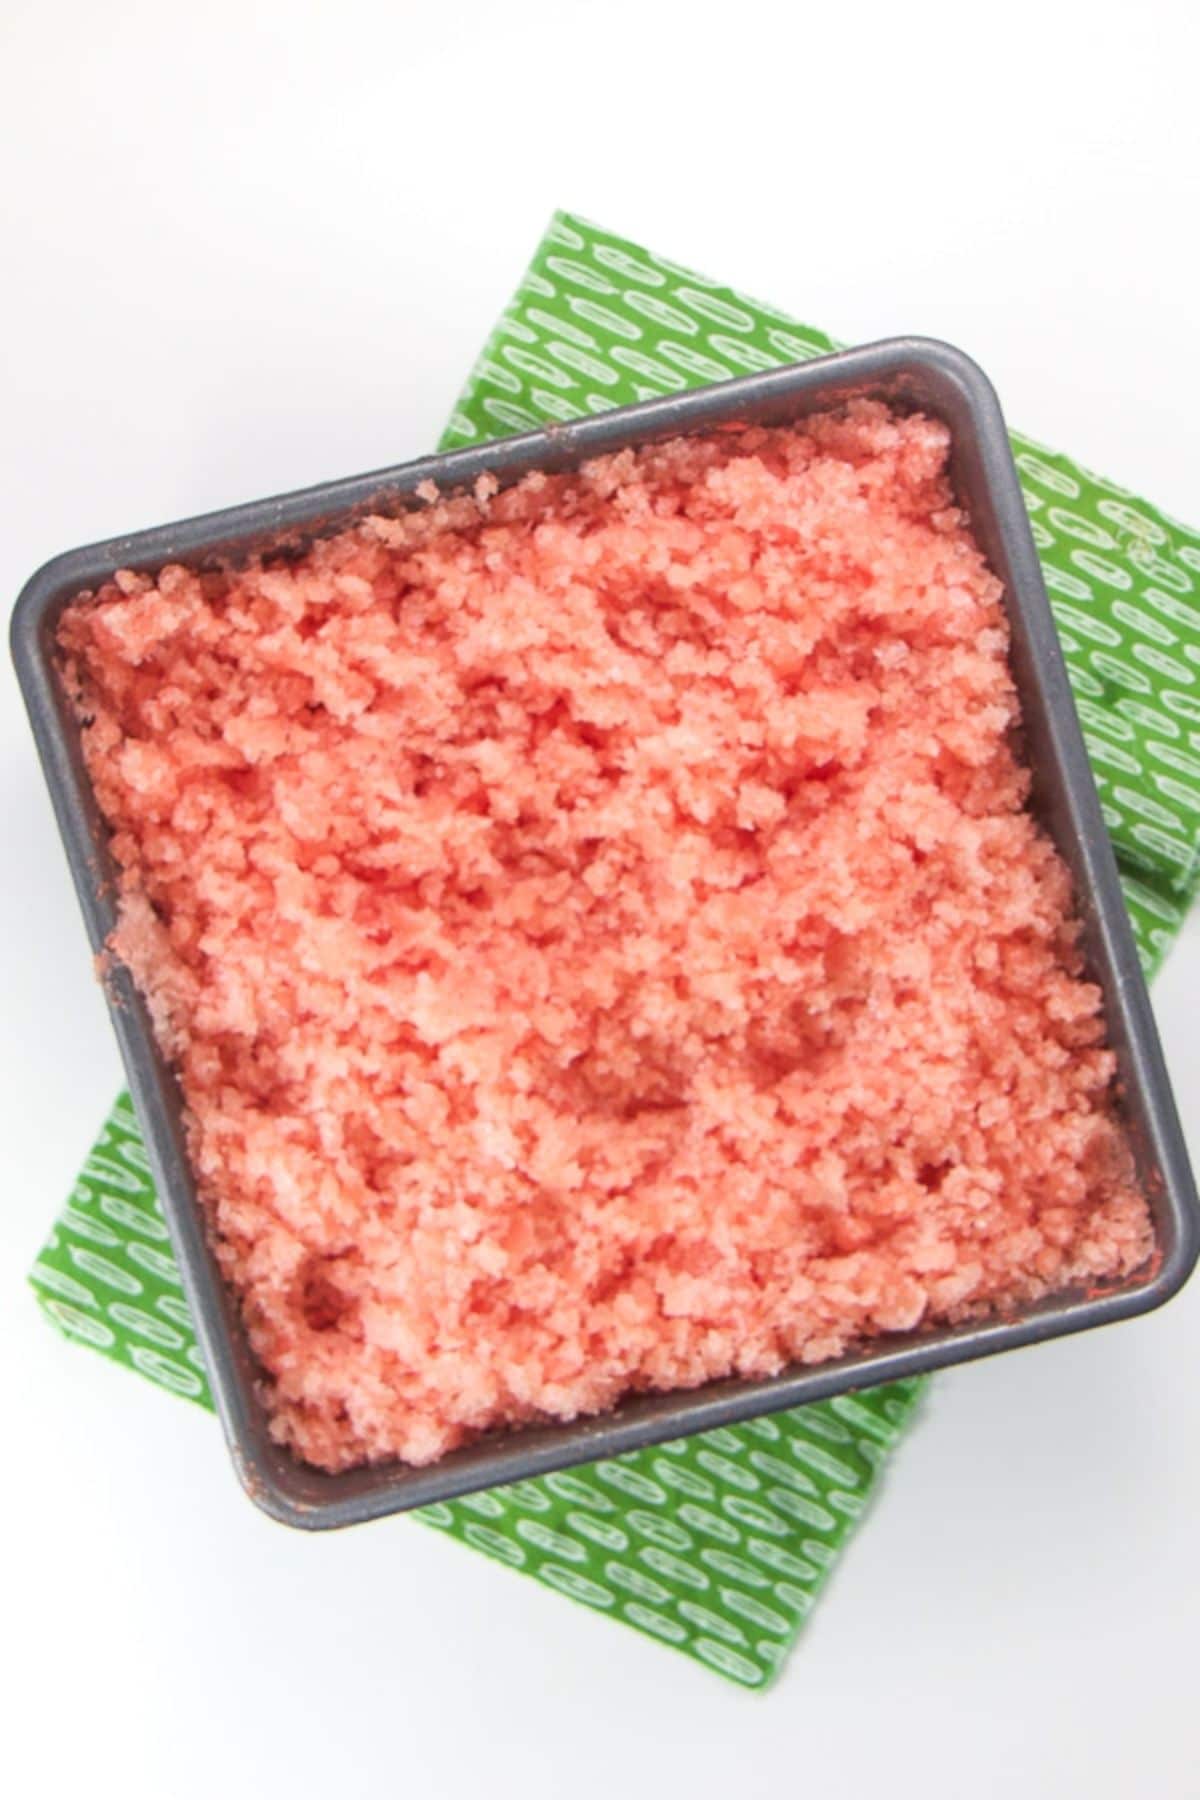 on a green cloth is a square bowl full of watermelon slush